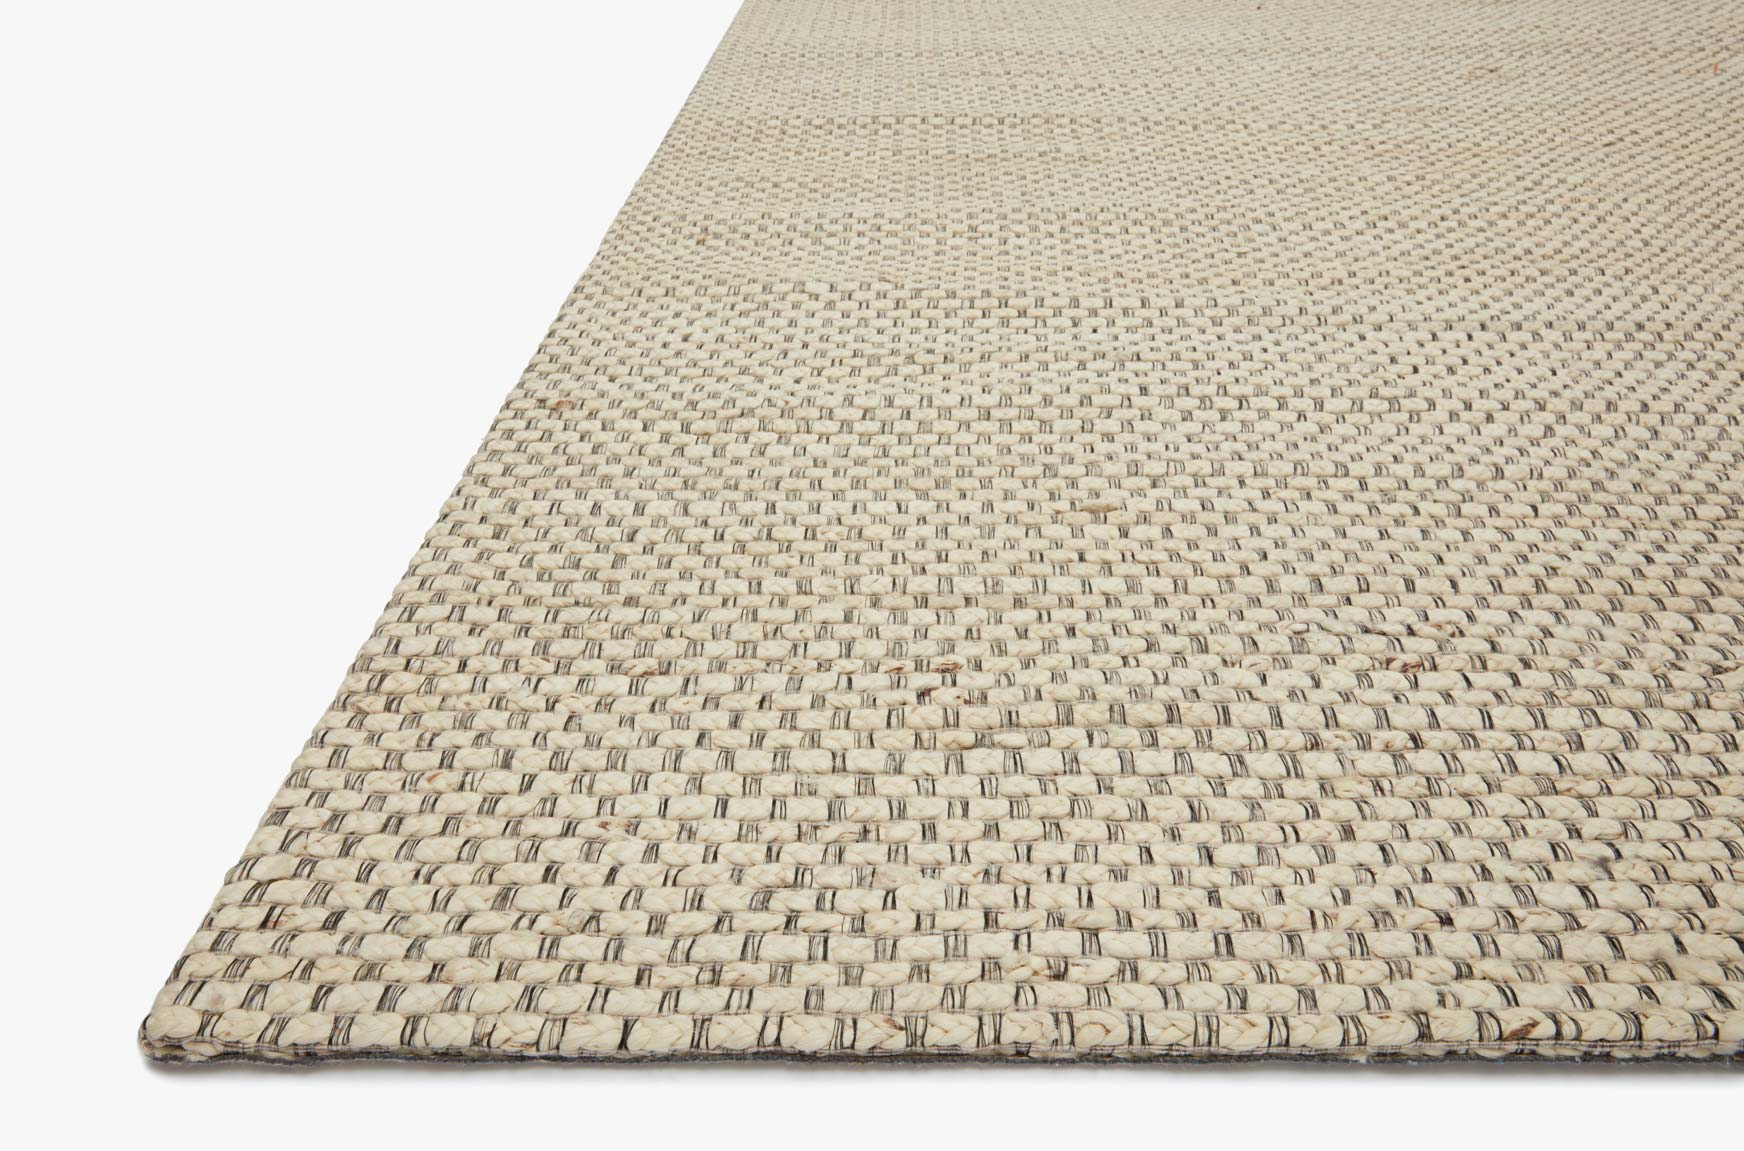 Lily Lil-01 Ivory Rug - Rug & Home